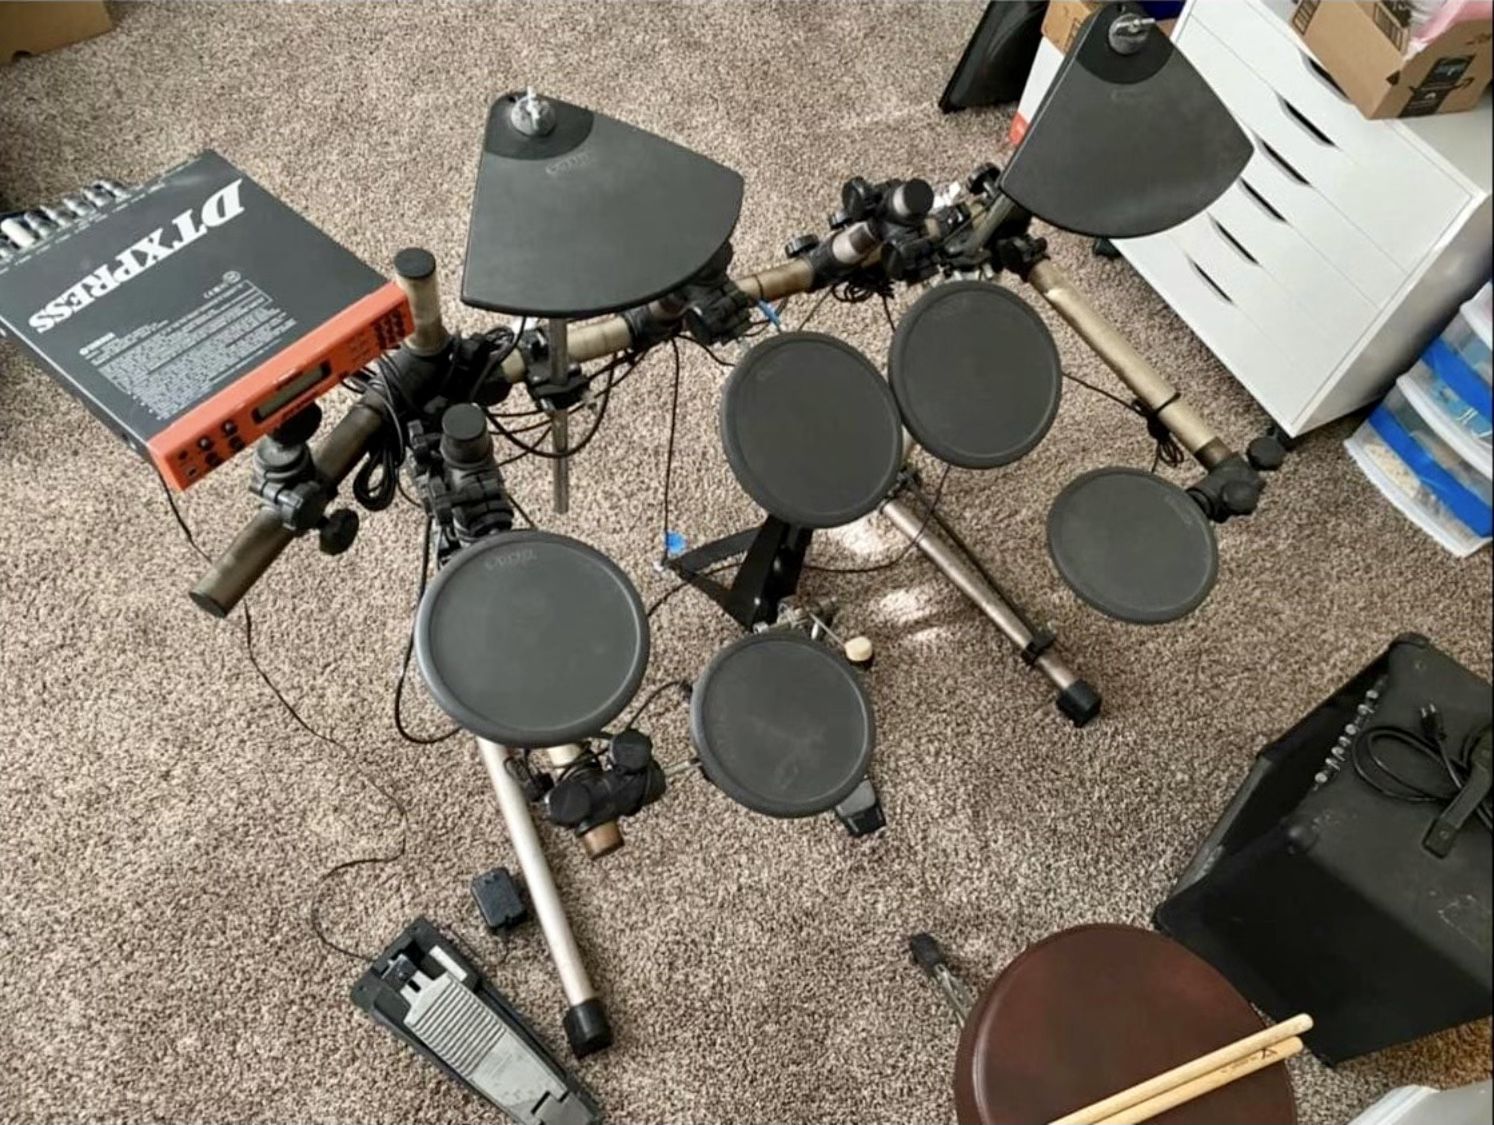 Yamaha Electric Drum Set DTXPRESS w Bass Amp Push See More for All Details